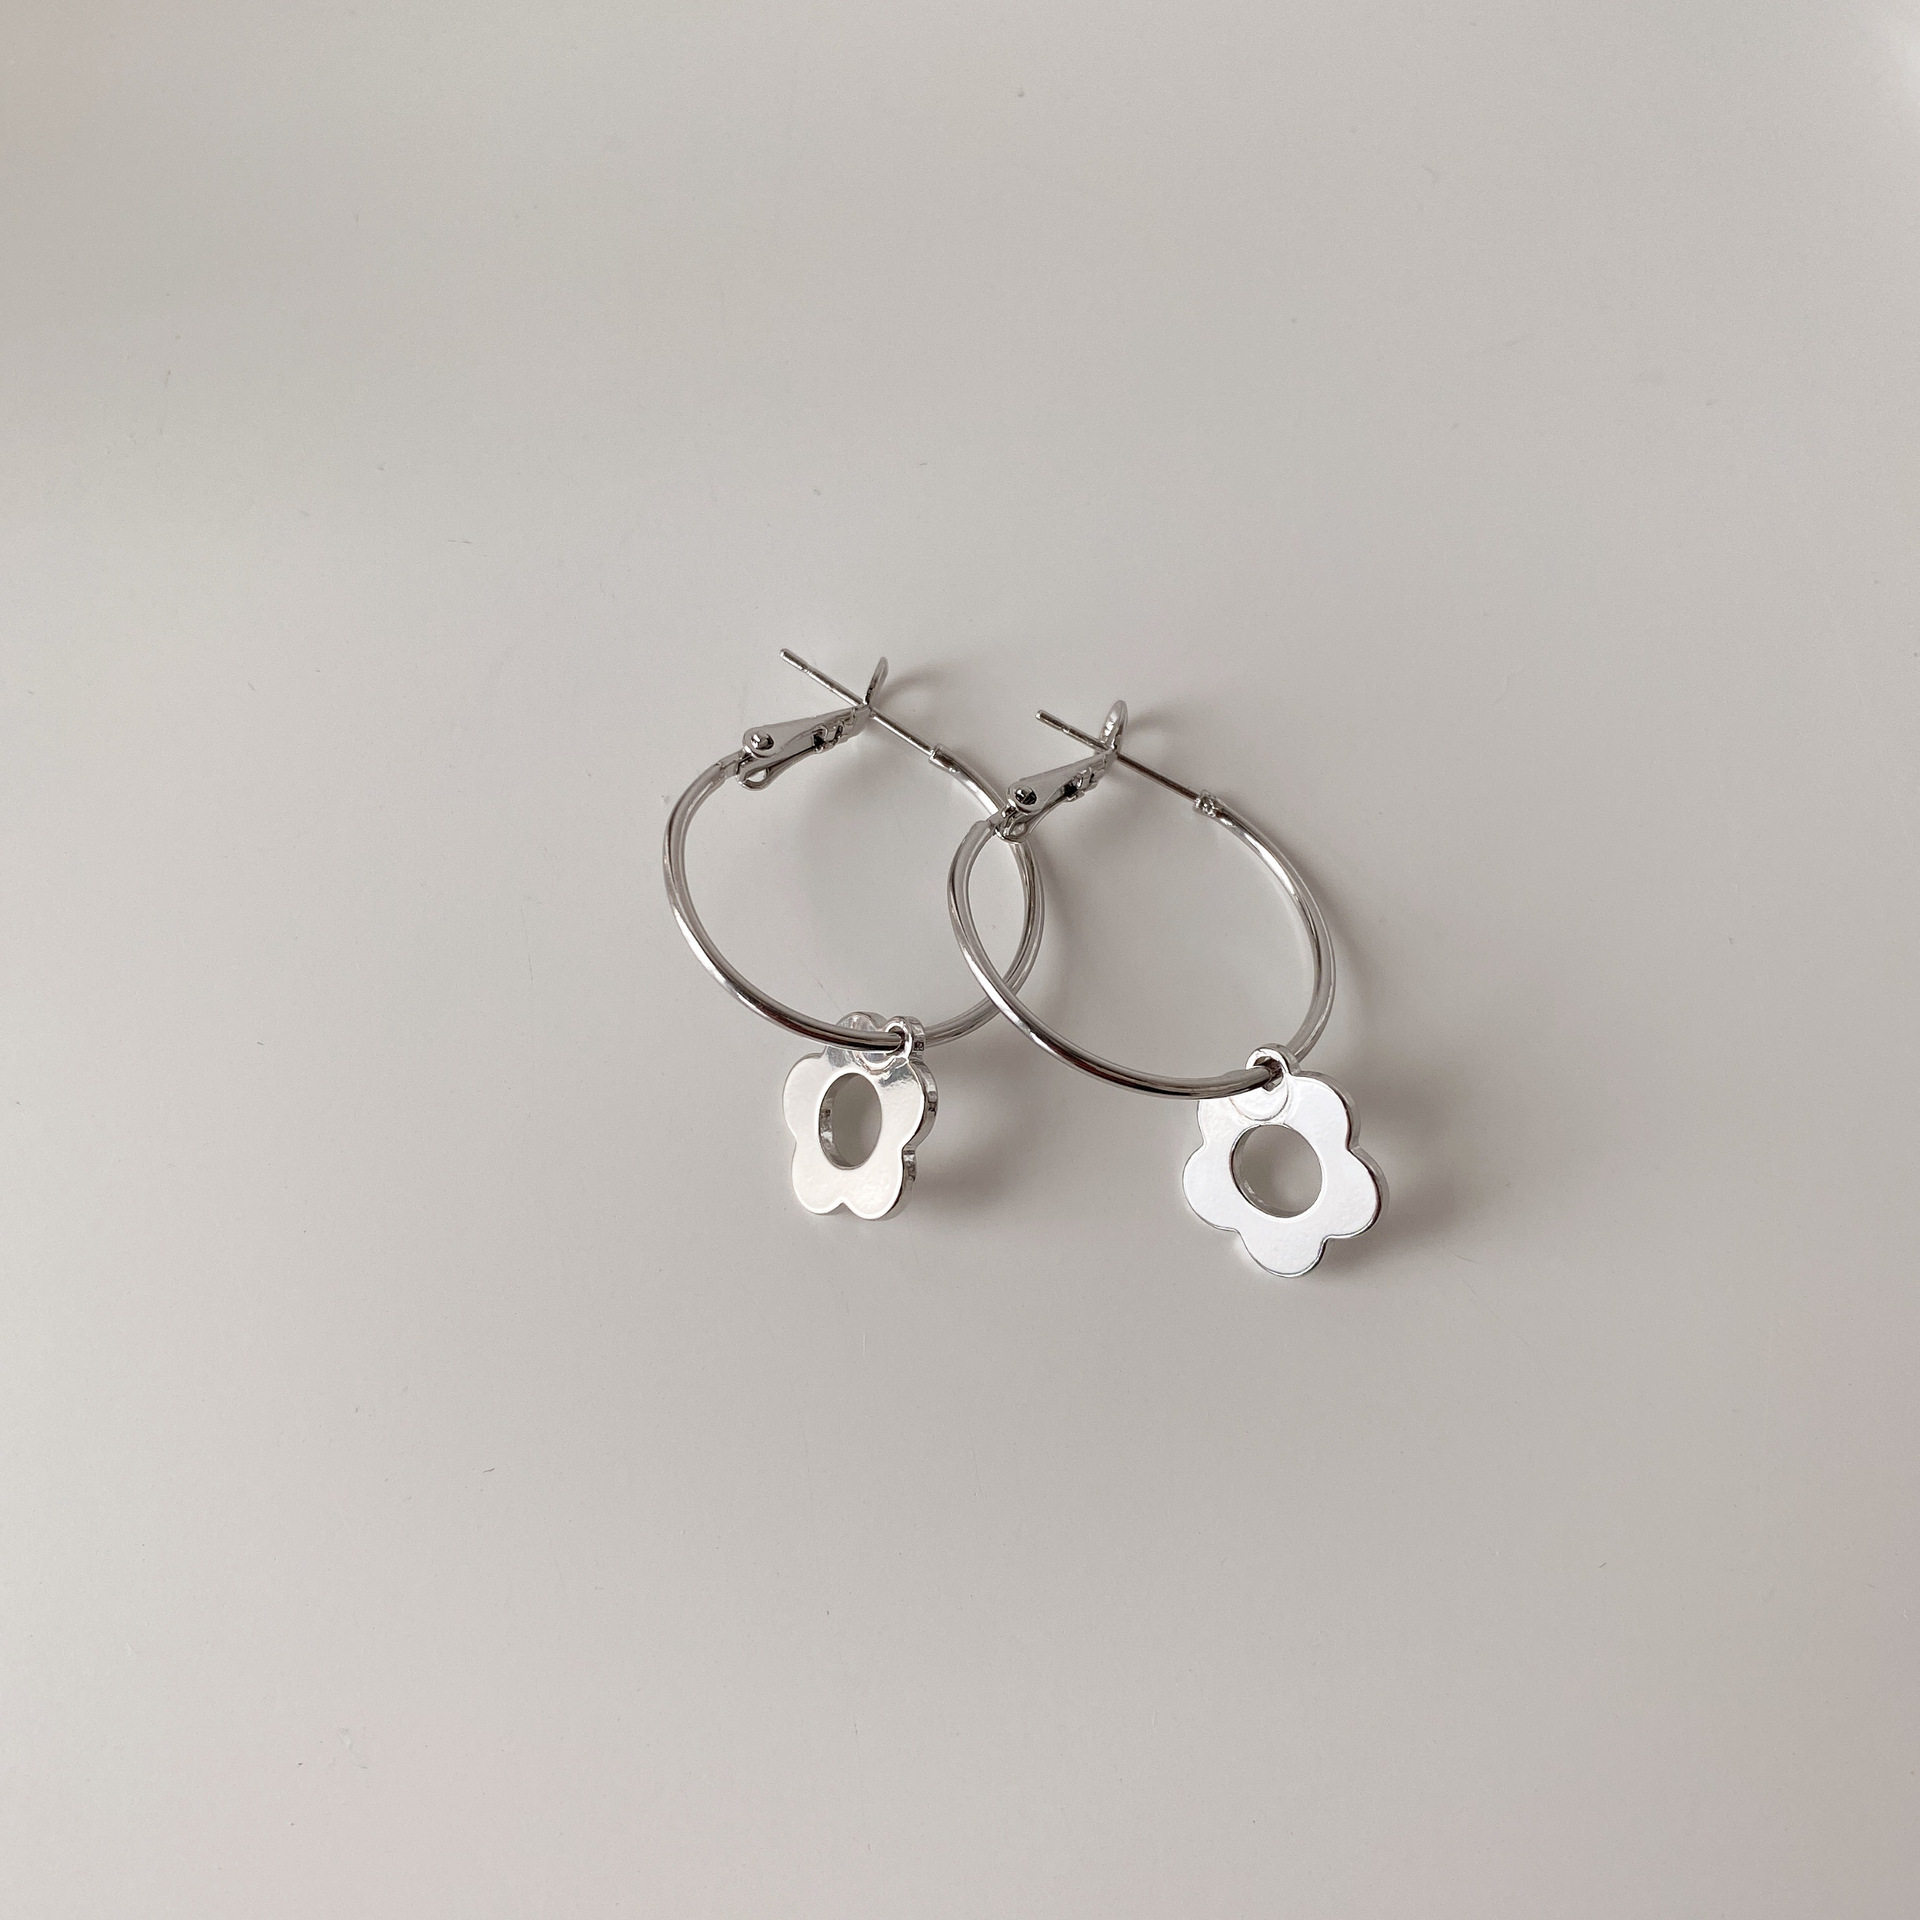 Retro simple metal small flower earringpicture5